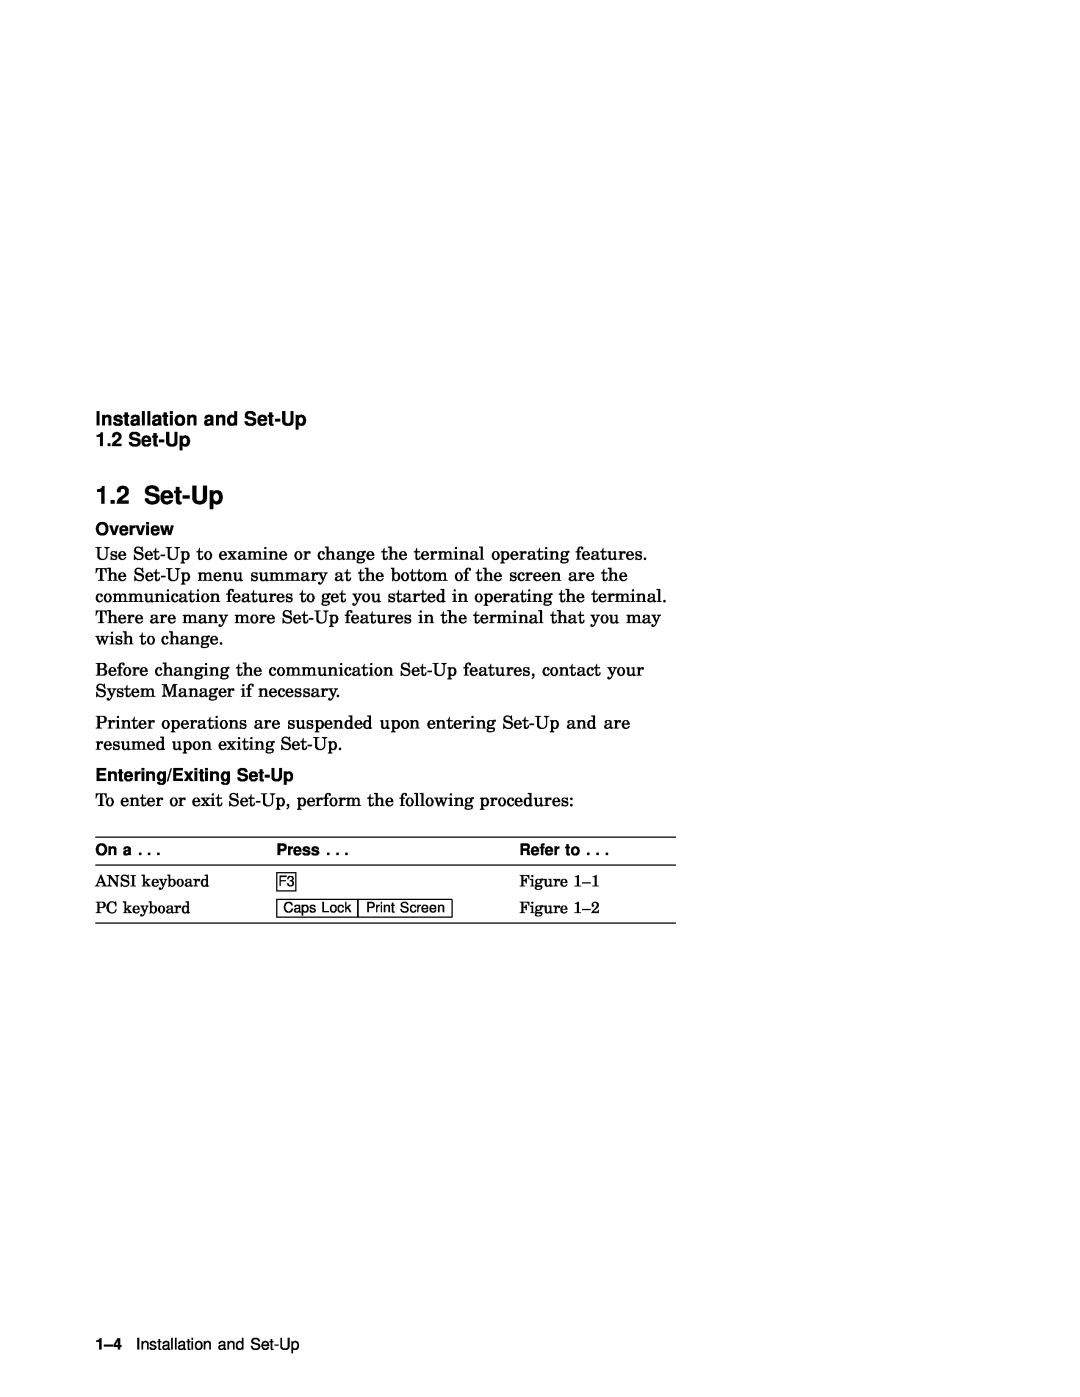 IBM WS525 manual Installation and Set-Up 1.2 Set-Up, Overview, Entering/Exiting Set-Up 